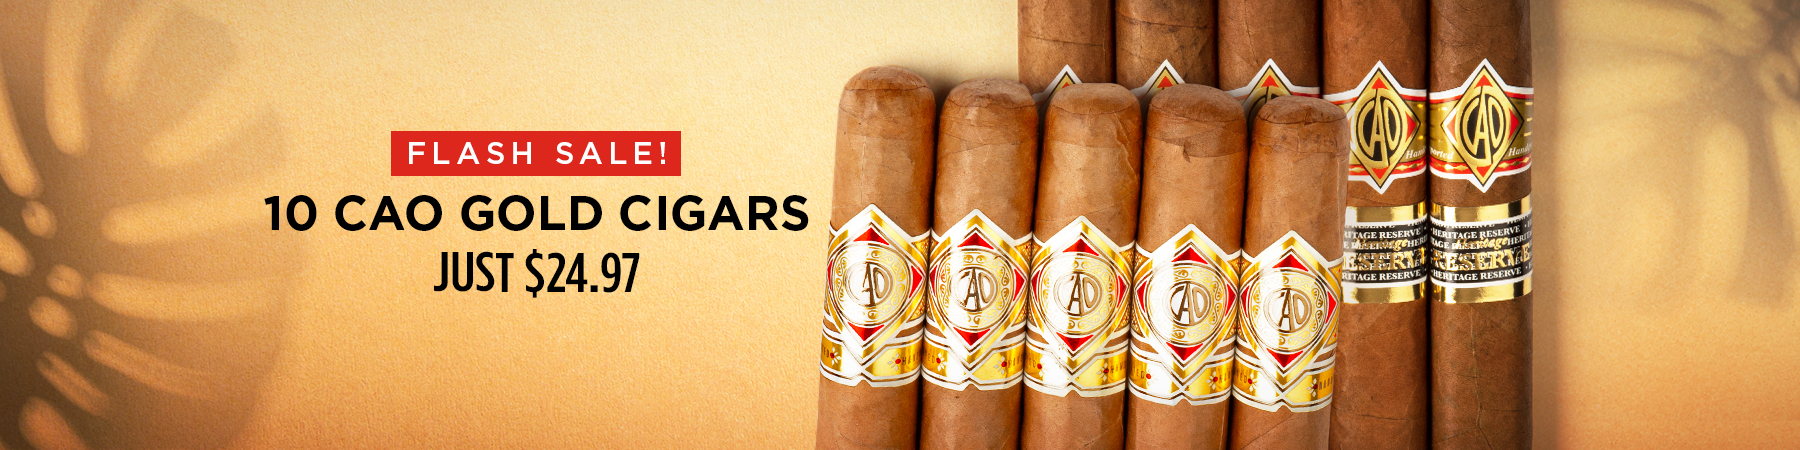 10 cao gold cigars only $24.97